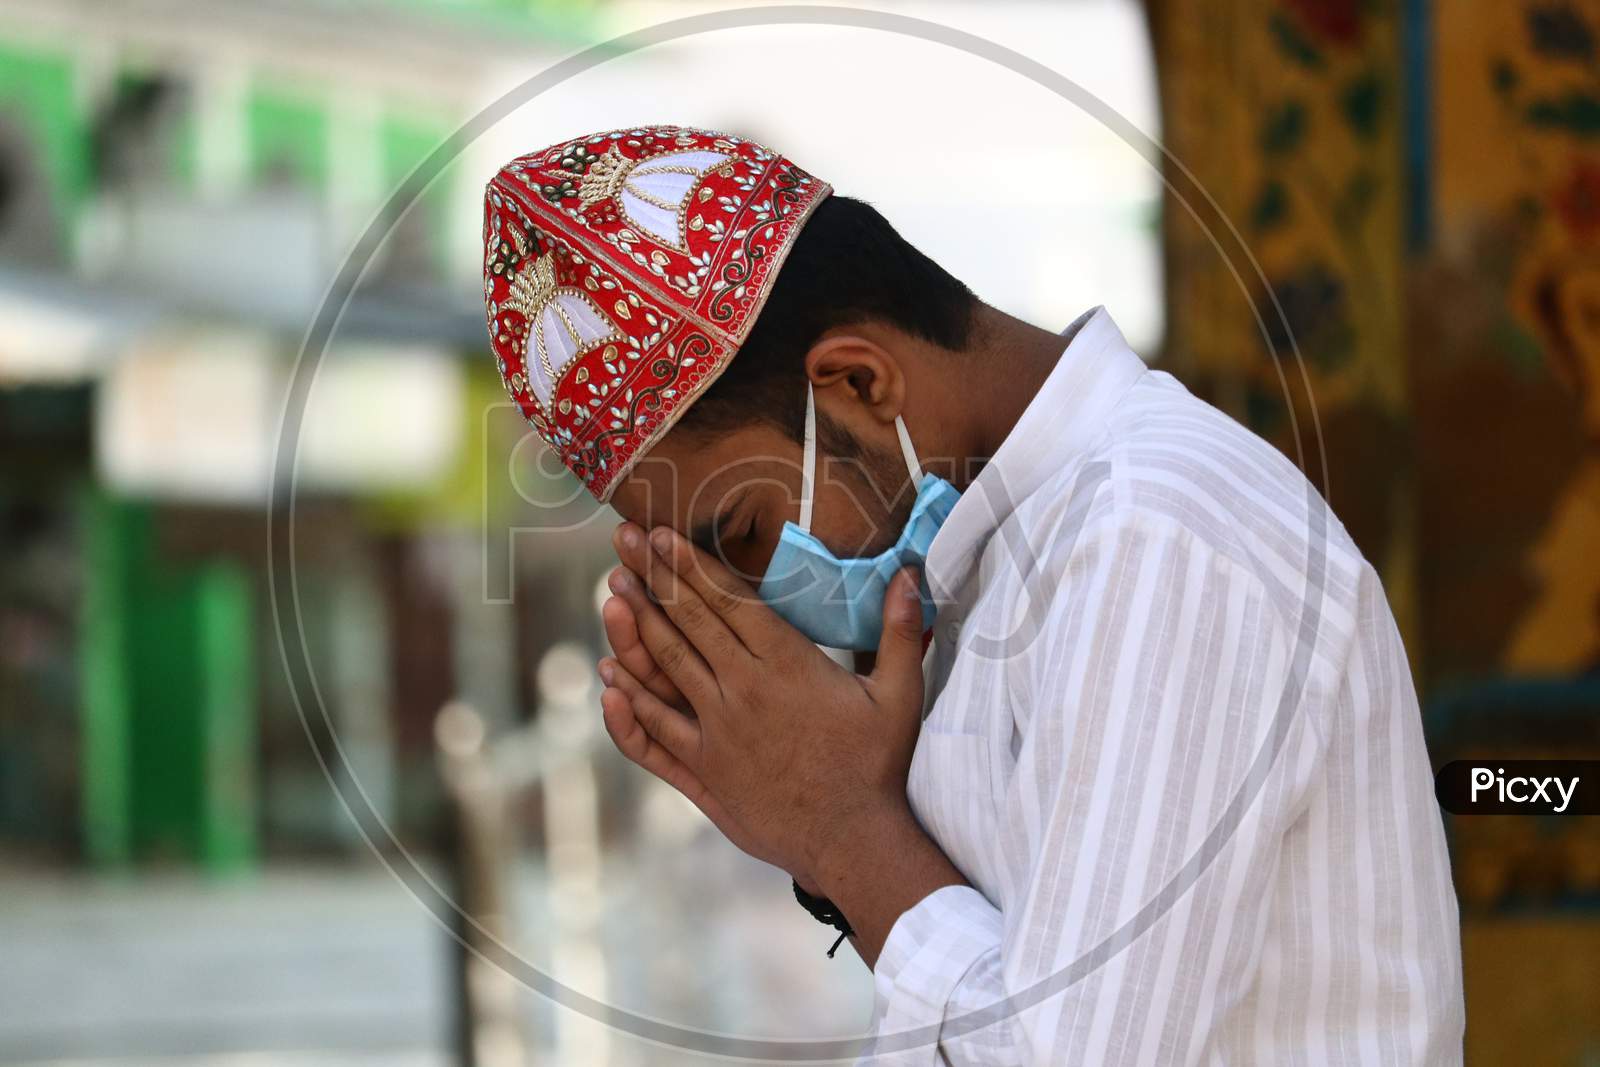 Indian Muslim Devotee Offer Prayer From Outside The Shrine Of Sufi Saint Khwaja Moinuddin Chishti During The Holy Month Of Ramadan, Nationwide Lockdown Imposed In The Wake Of The Deadly Novel Coronavirus Pandemic In Ajmer, Rajasthan,India. April 28, 2020.